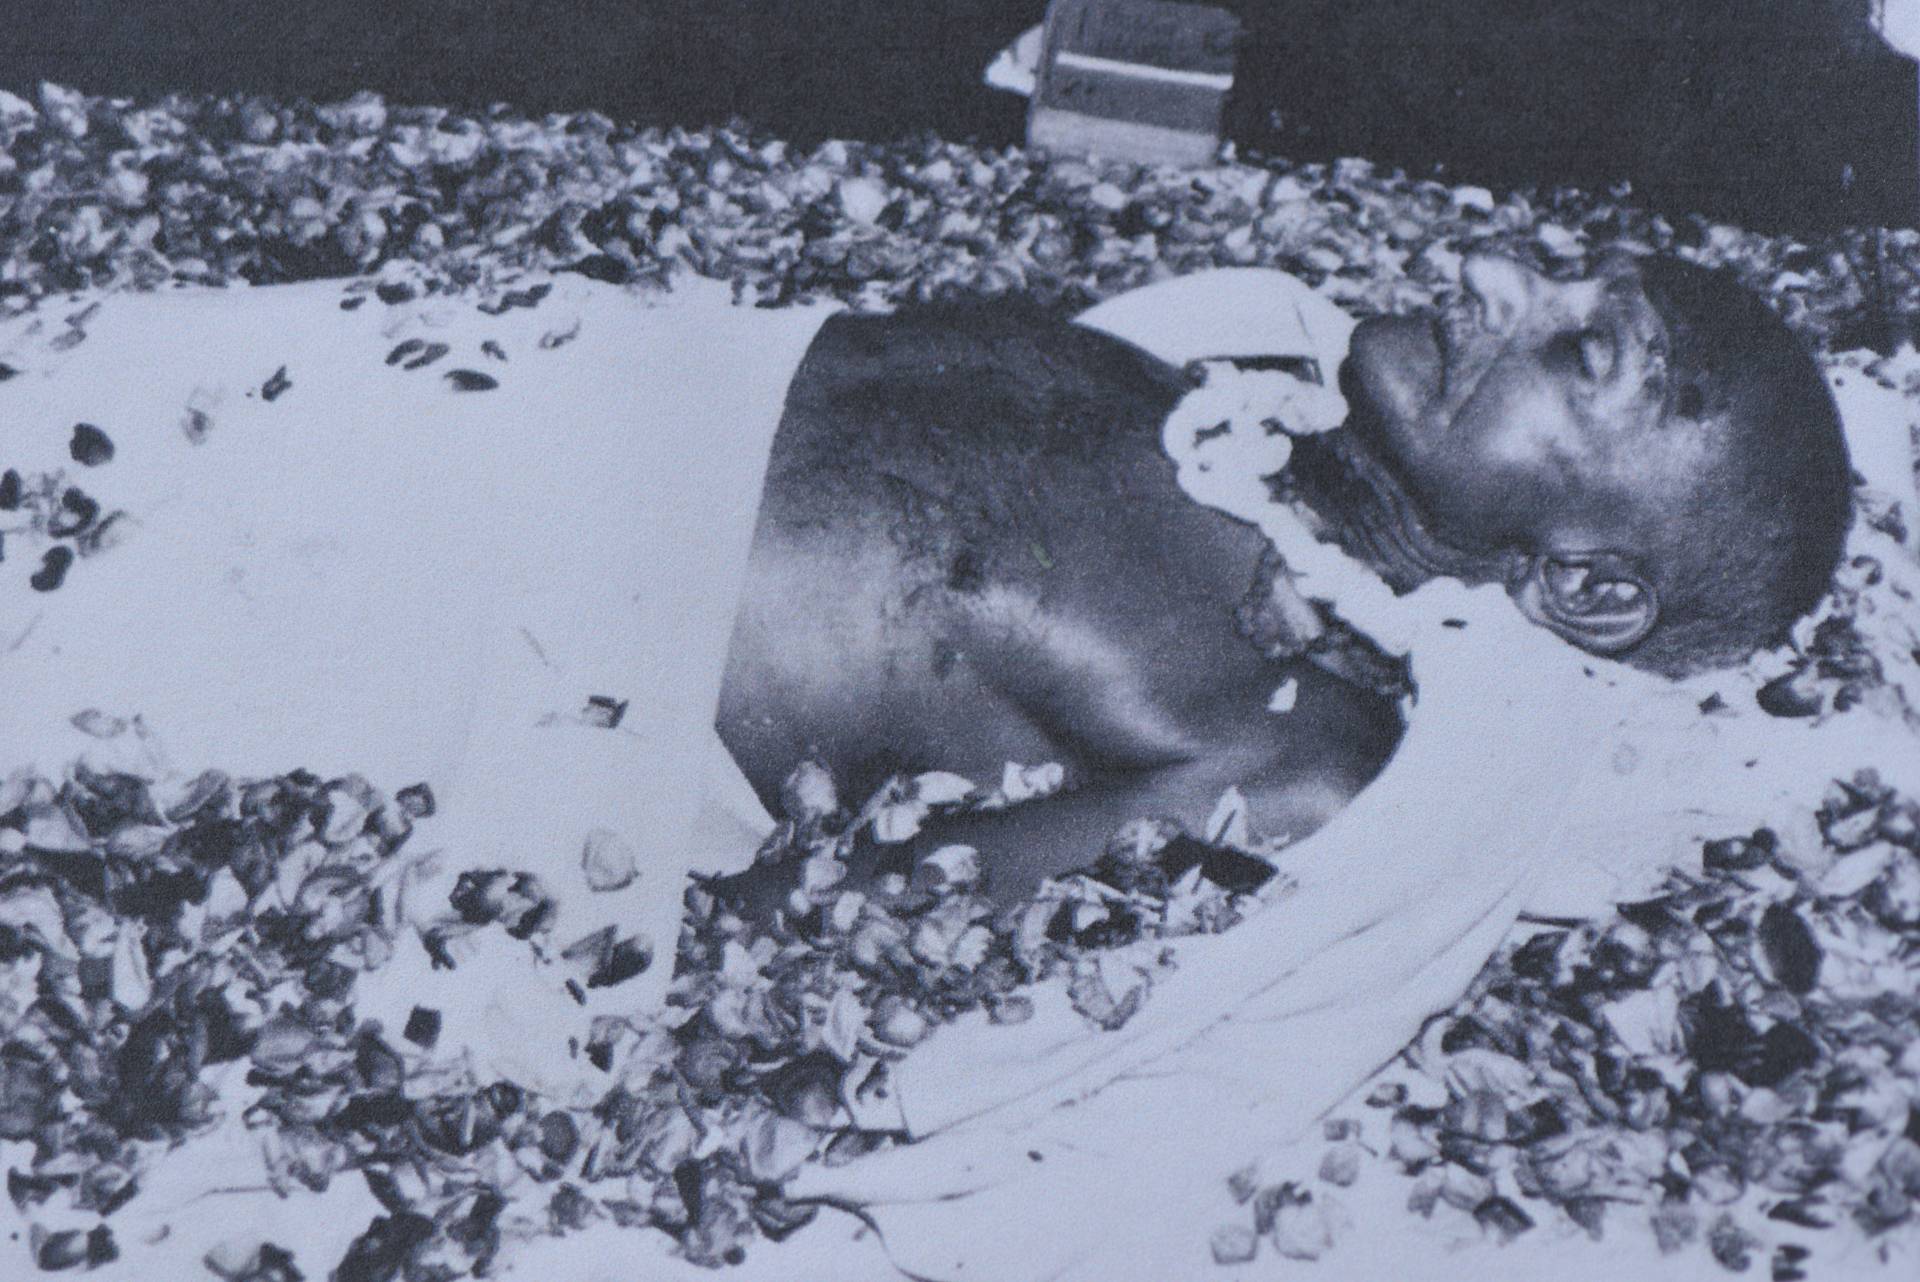 Photo 1. Body Ghandi covered with flowers